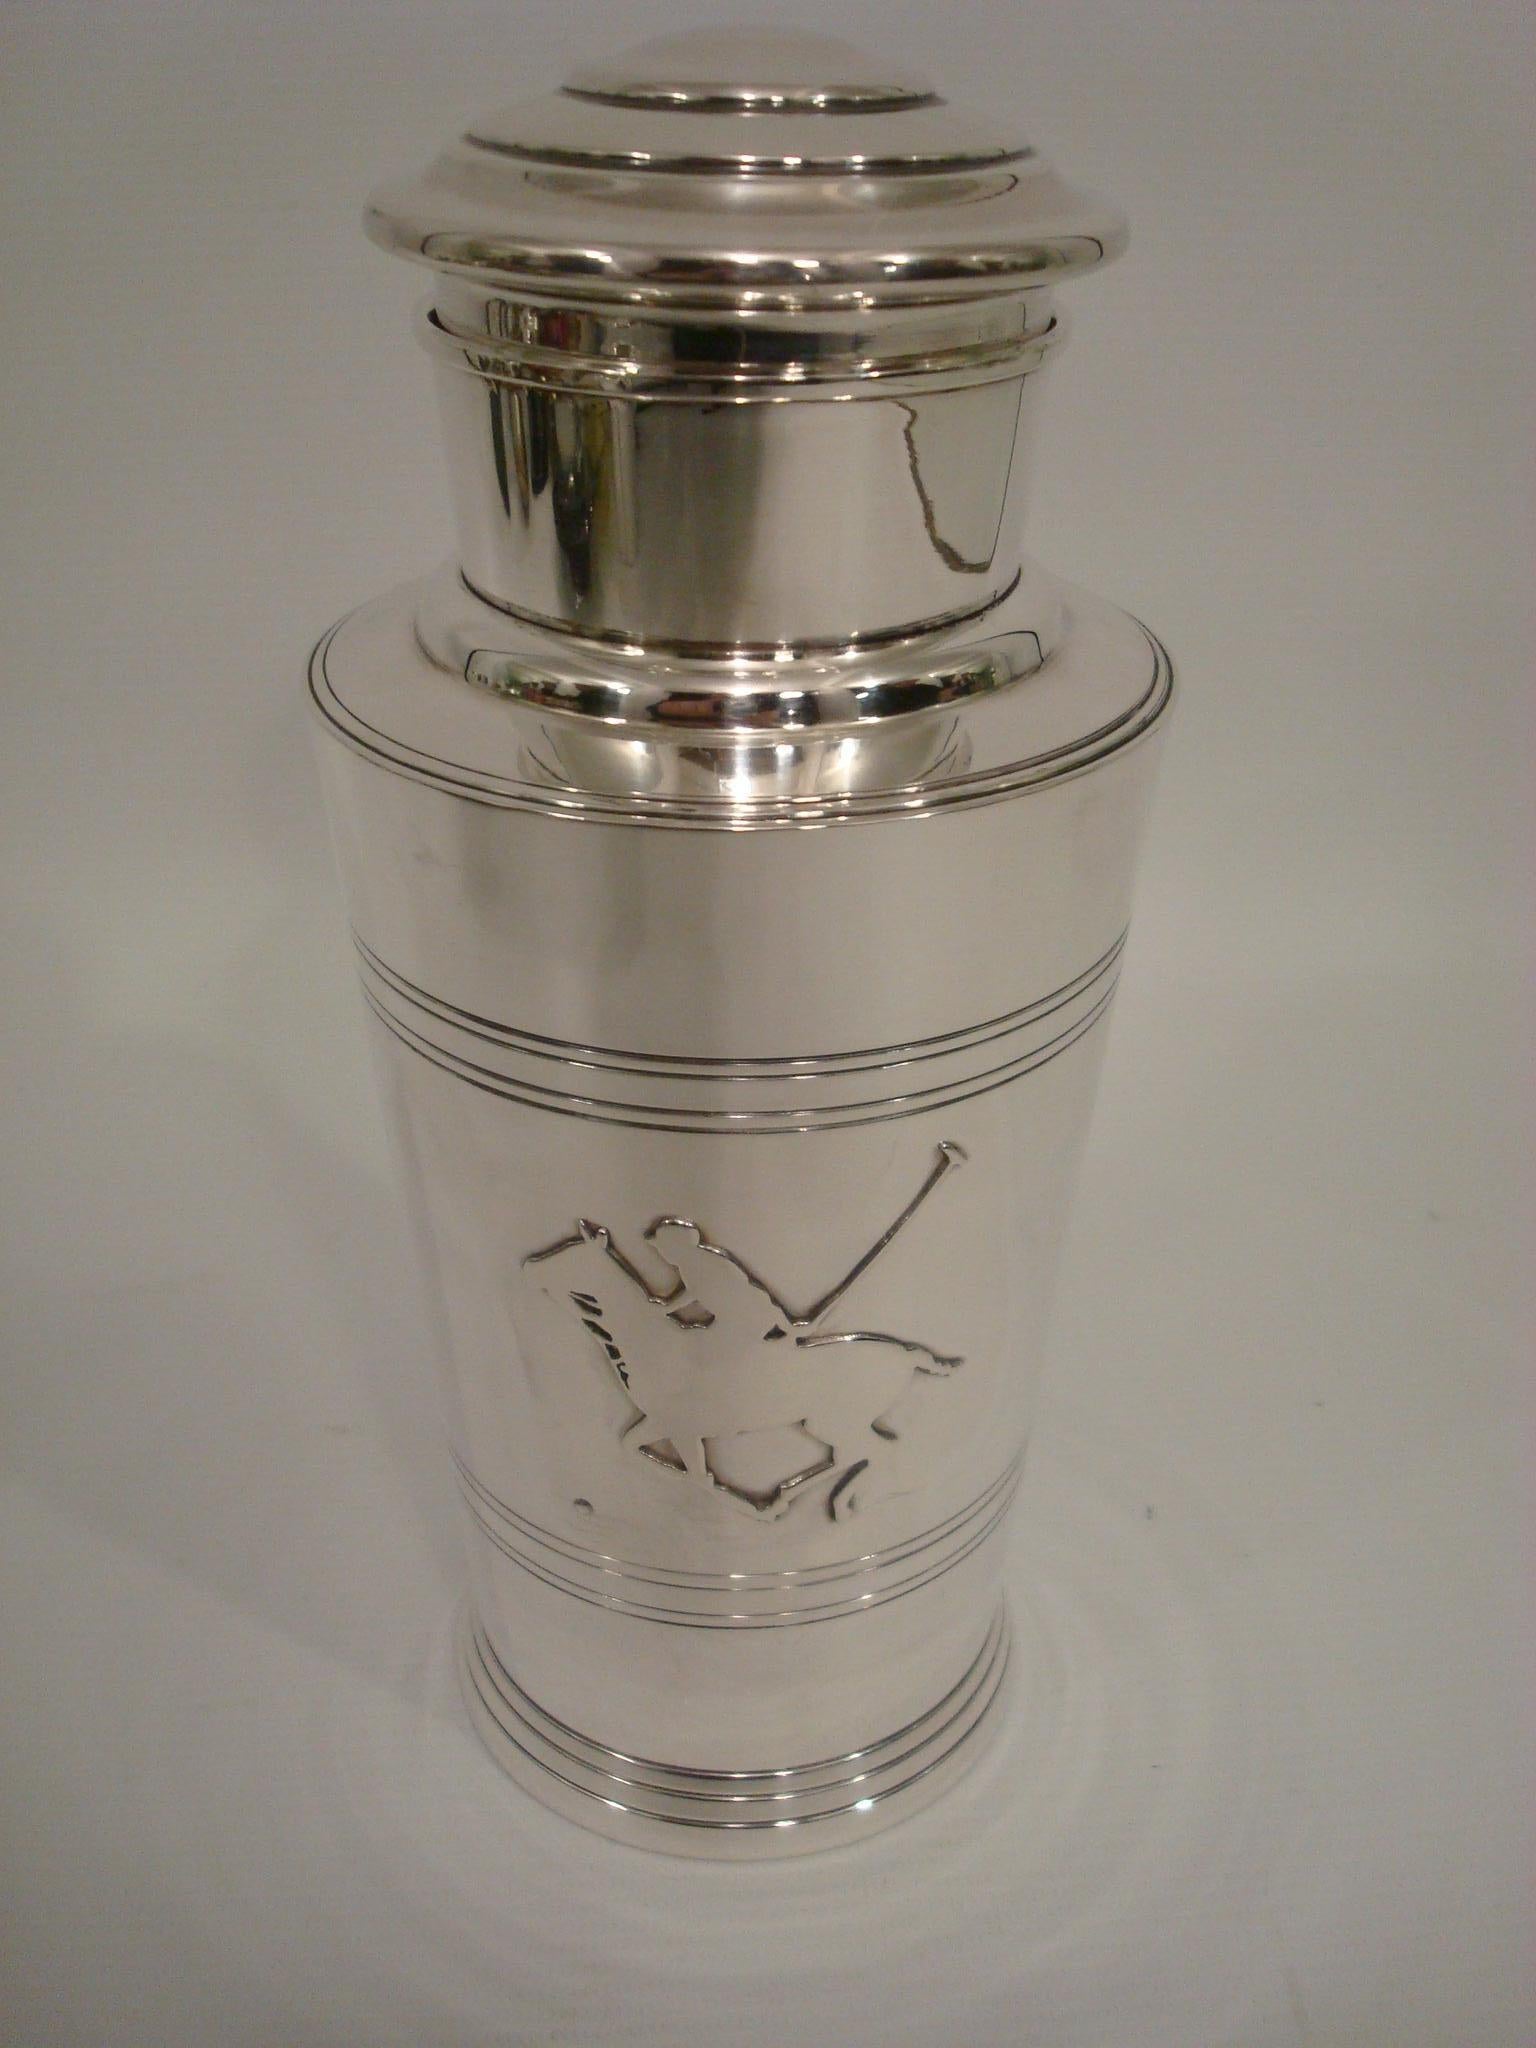 Art Deco Sterling Silver Polo Scene Cocktail Shaker 1930´s.
I surely was a Trophy / Cup, it has no engravings.
The scene is a player over his horse playing a polo match.
All Made of Sterling Silver. Marked Sterling, 925, Industria Argentina, Wright